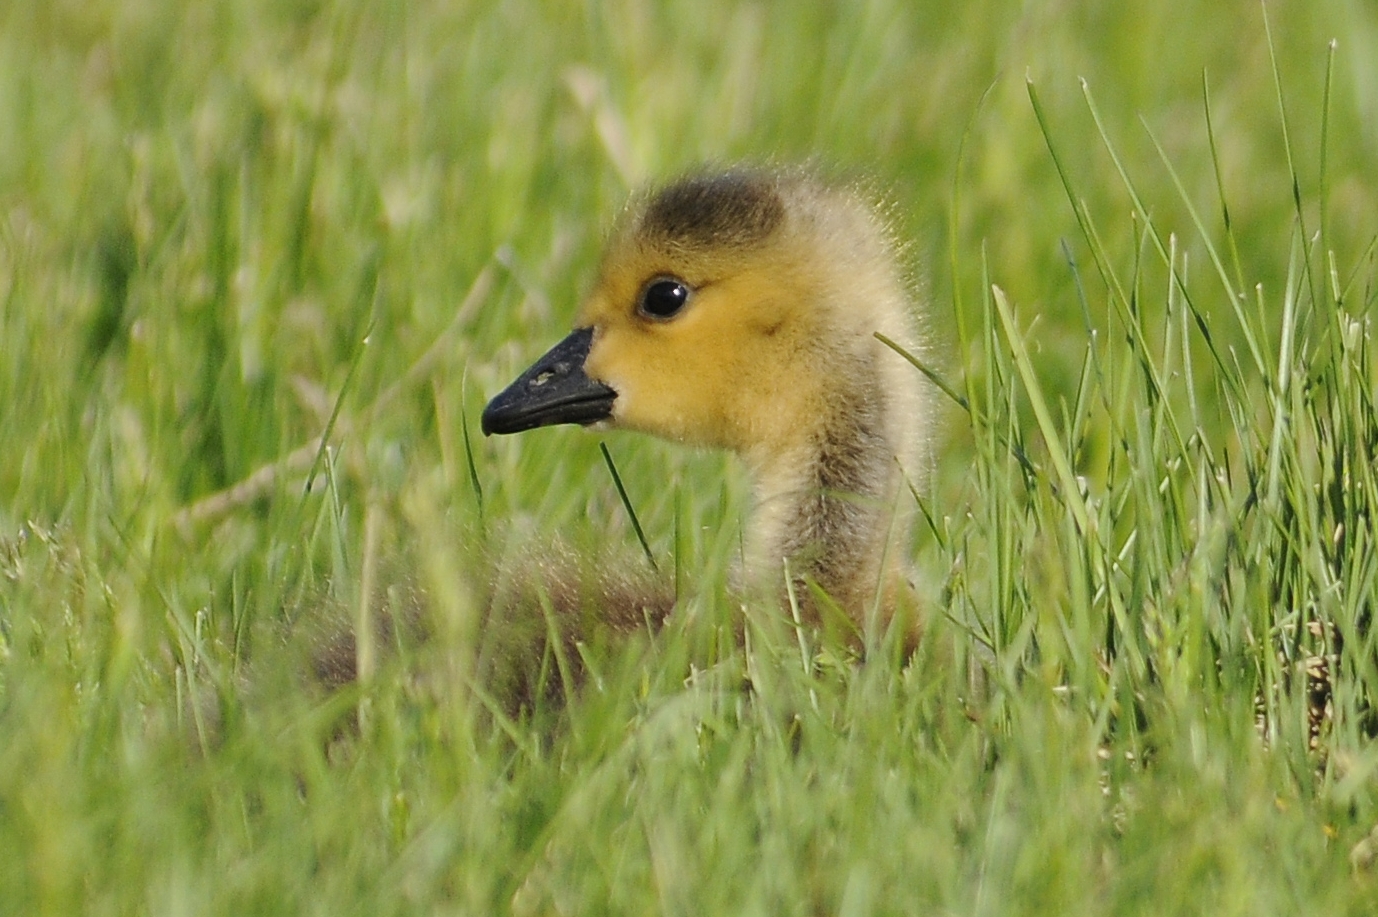 an image of a little duck in the grass